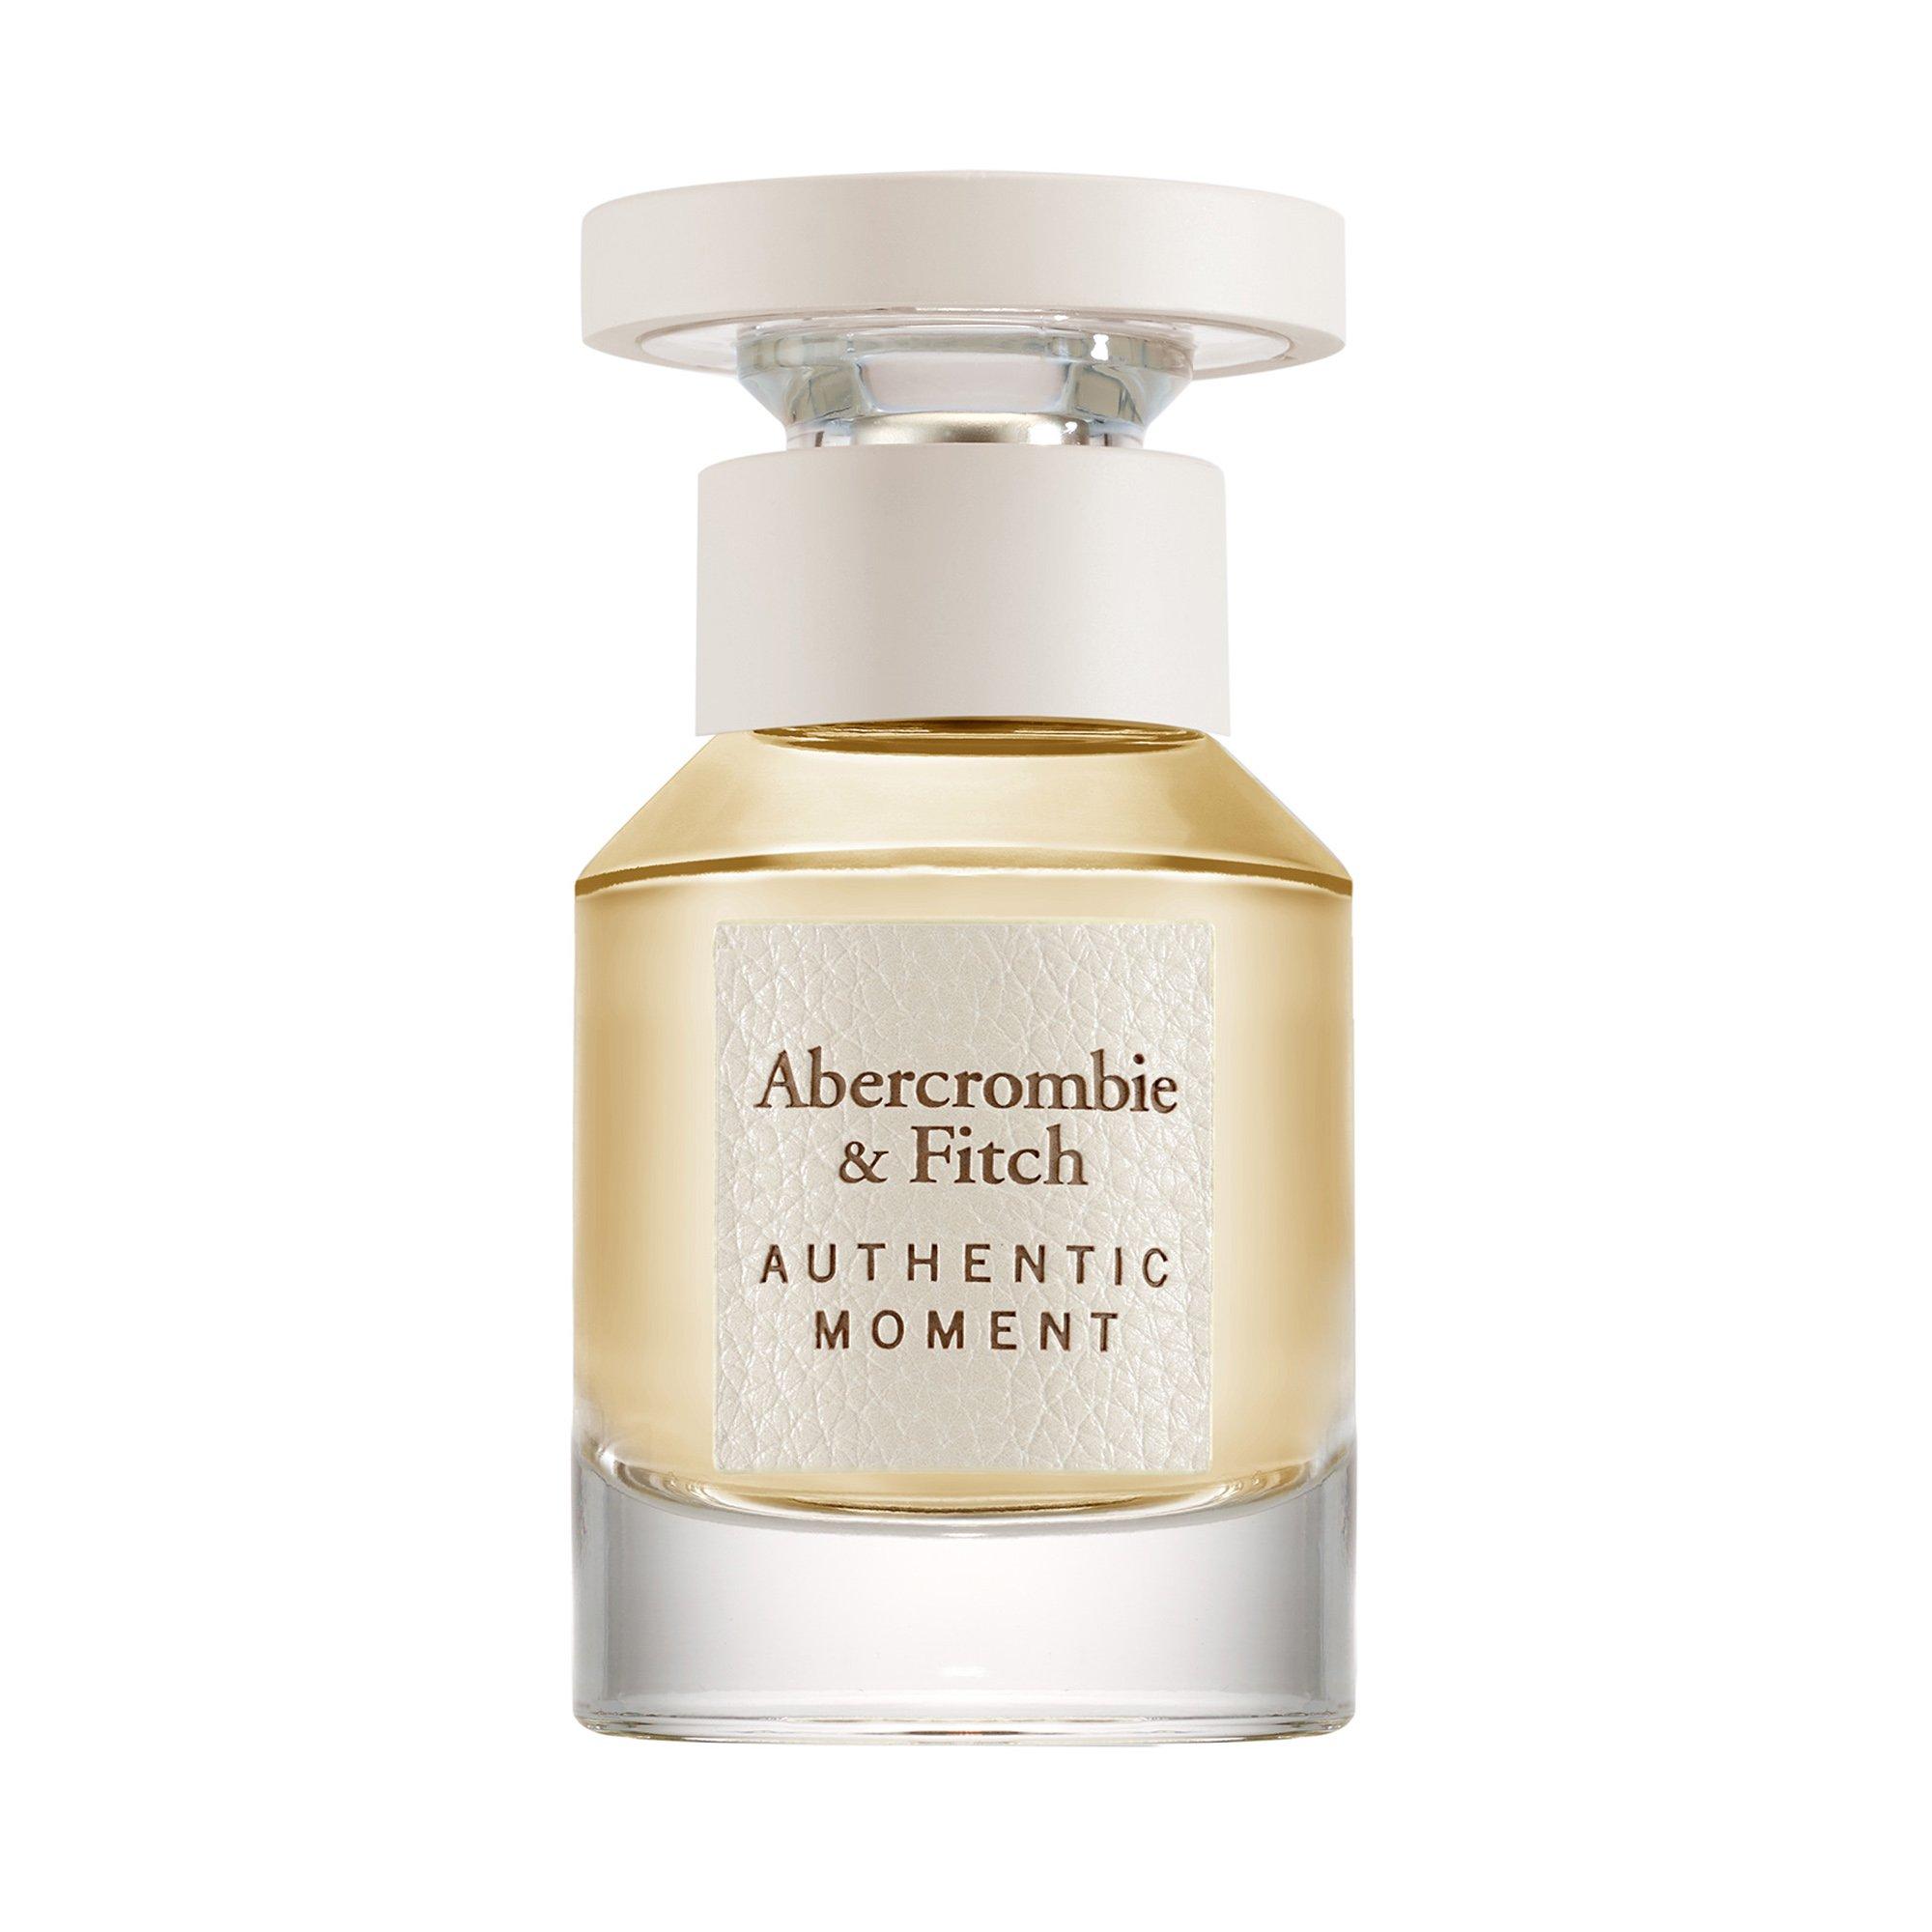 Image of Abercrombie & Fitch Authentic Moment - 30ml